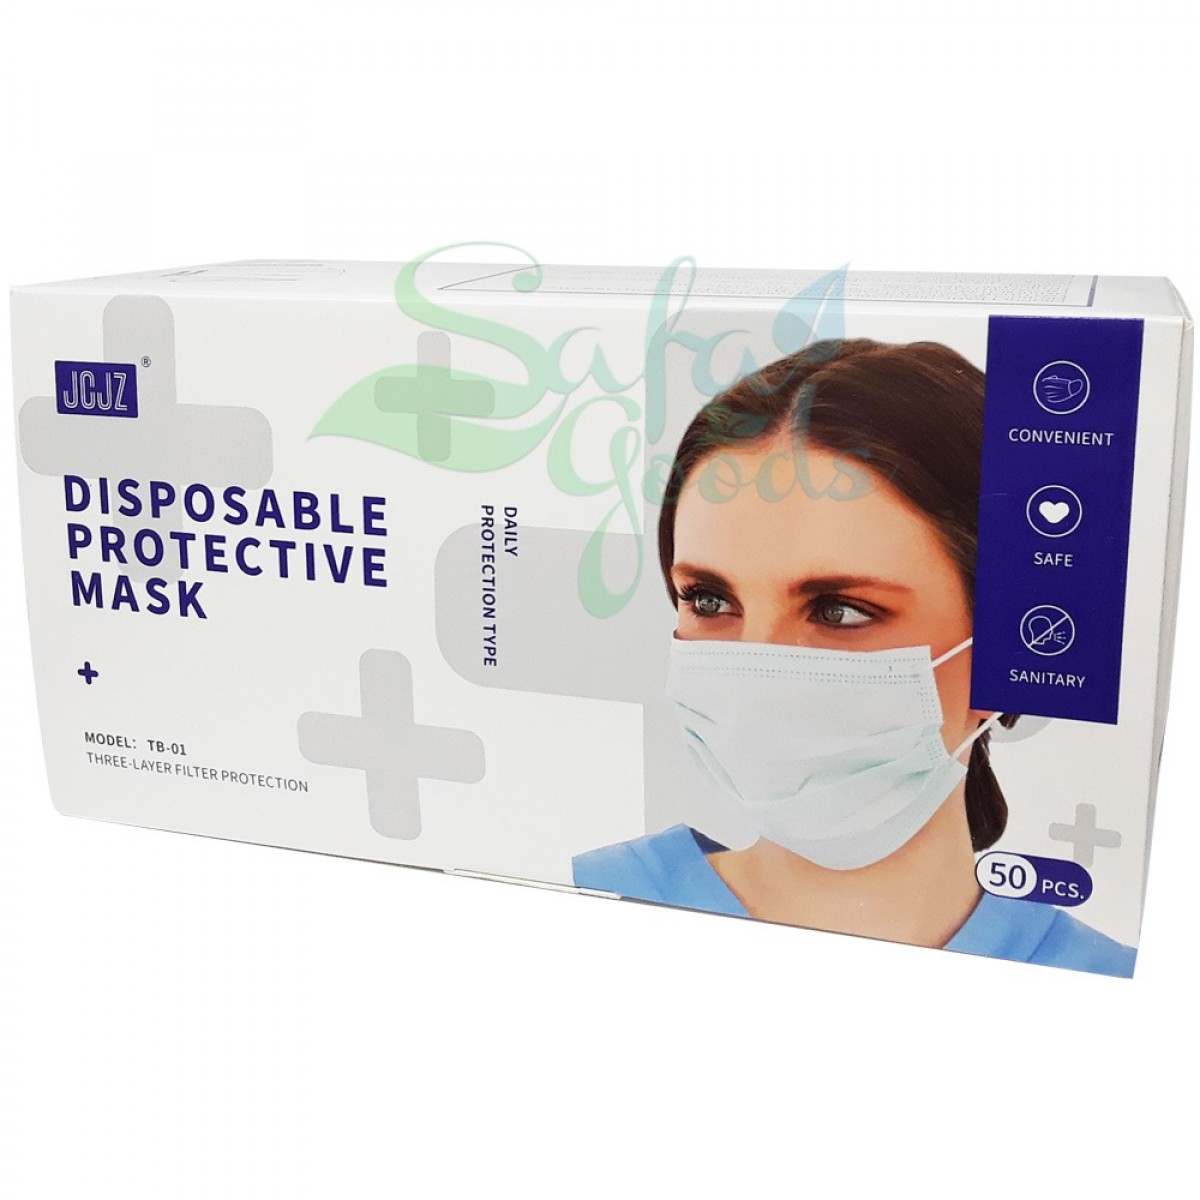 Disposable Protective Masks 50PC